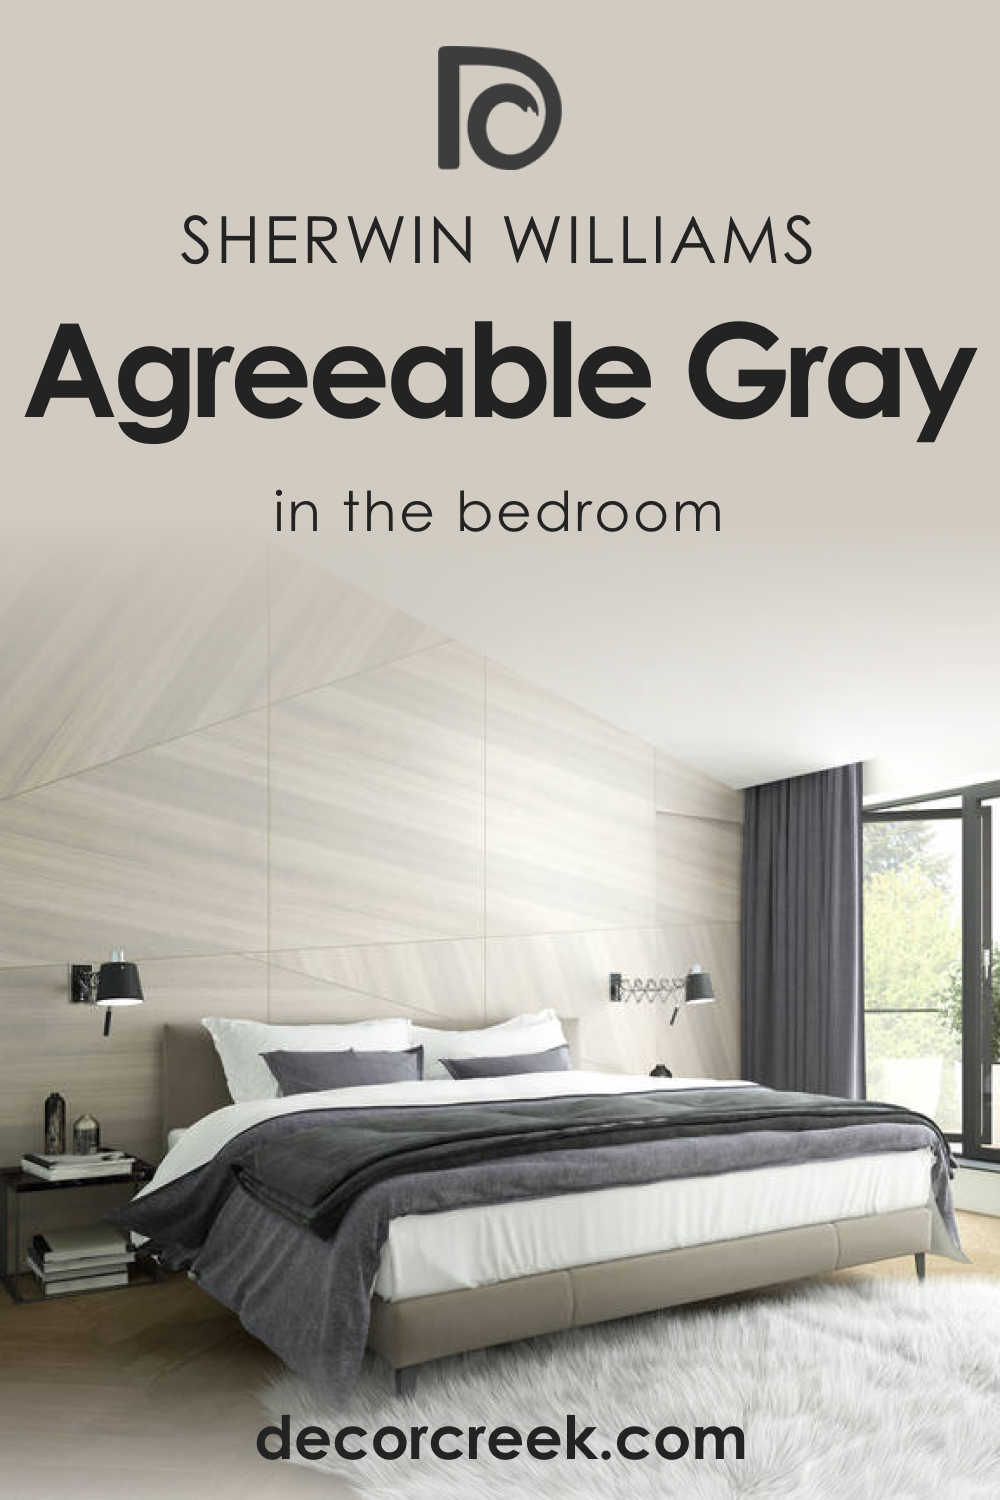 How to Use SW 7029 Agreeable Gray in the Bedroom?